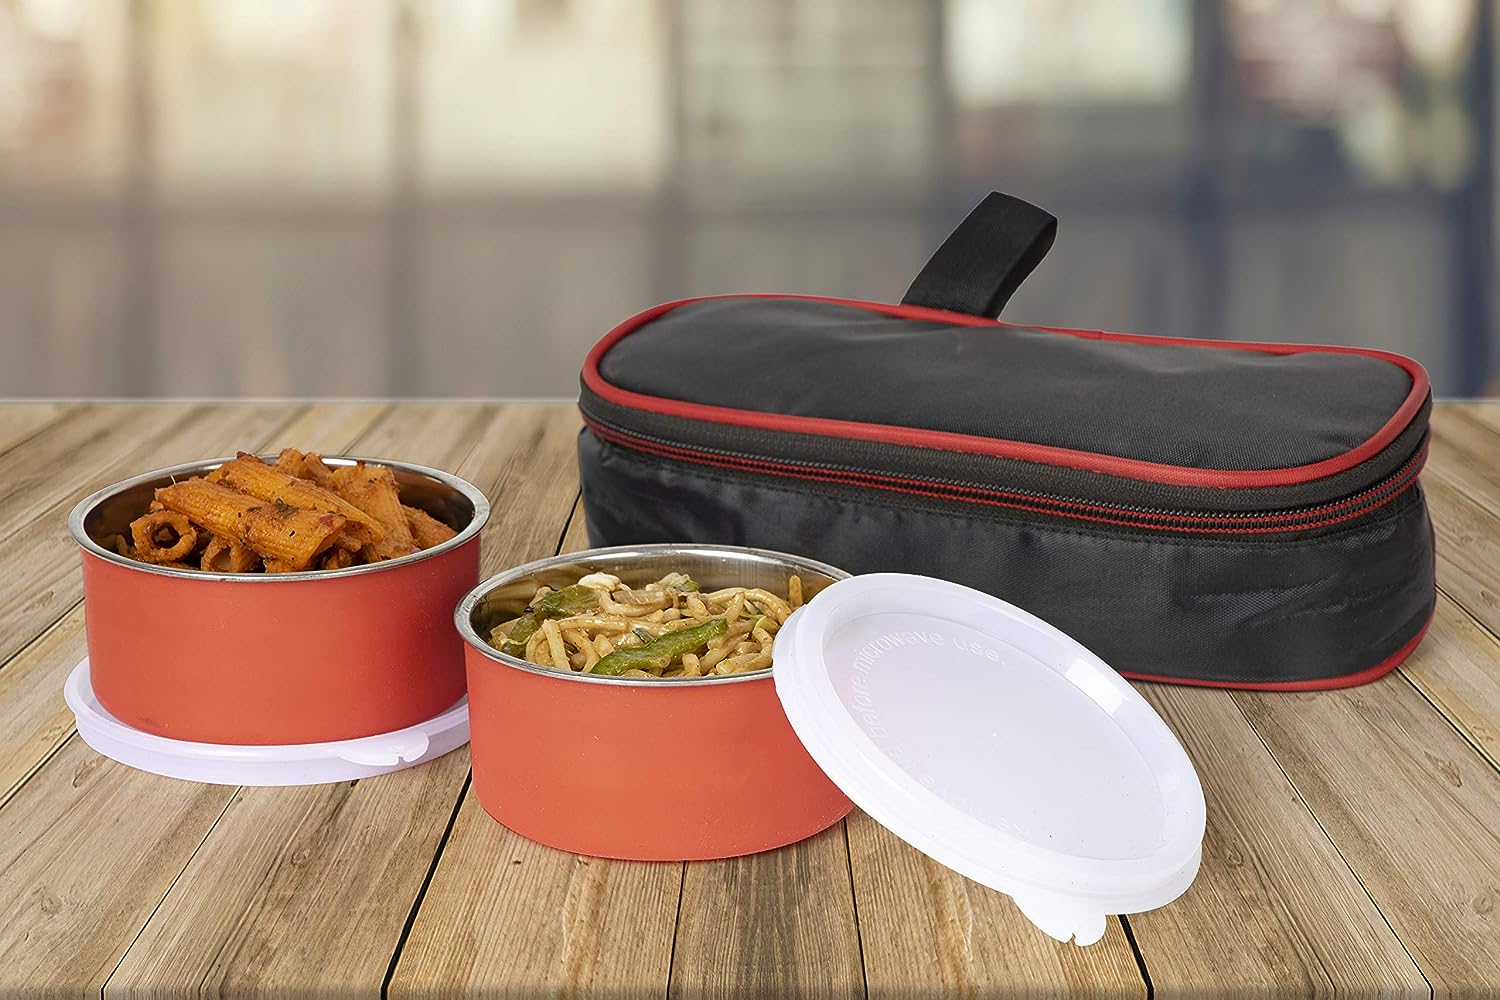 How To Use Insulated Lunch Box